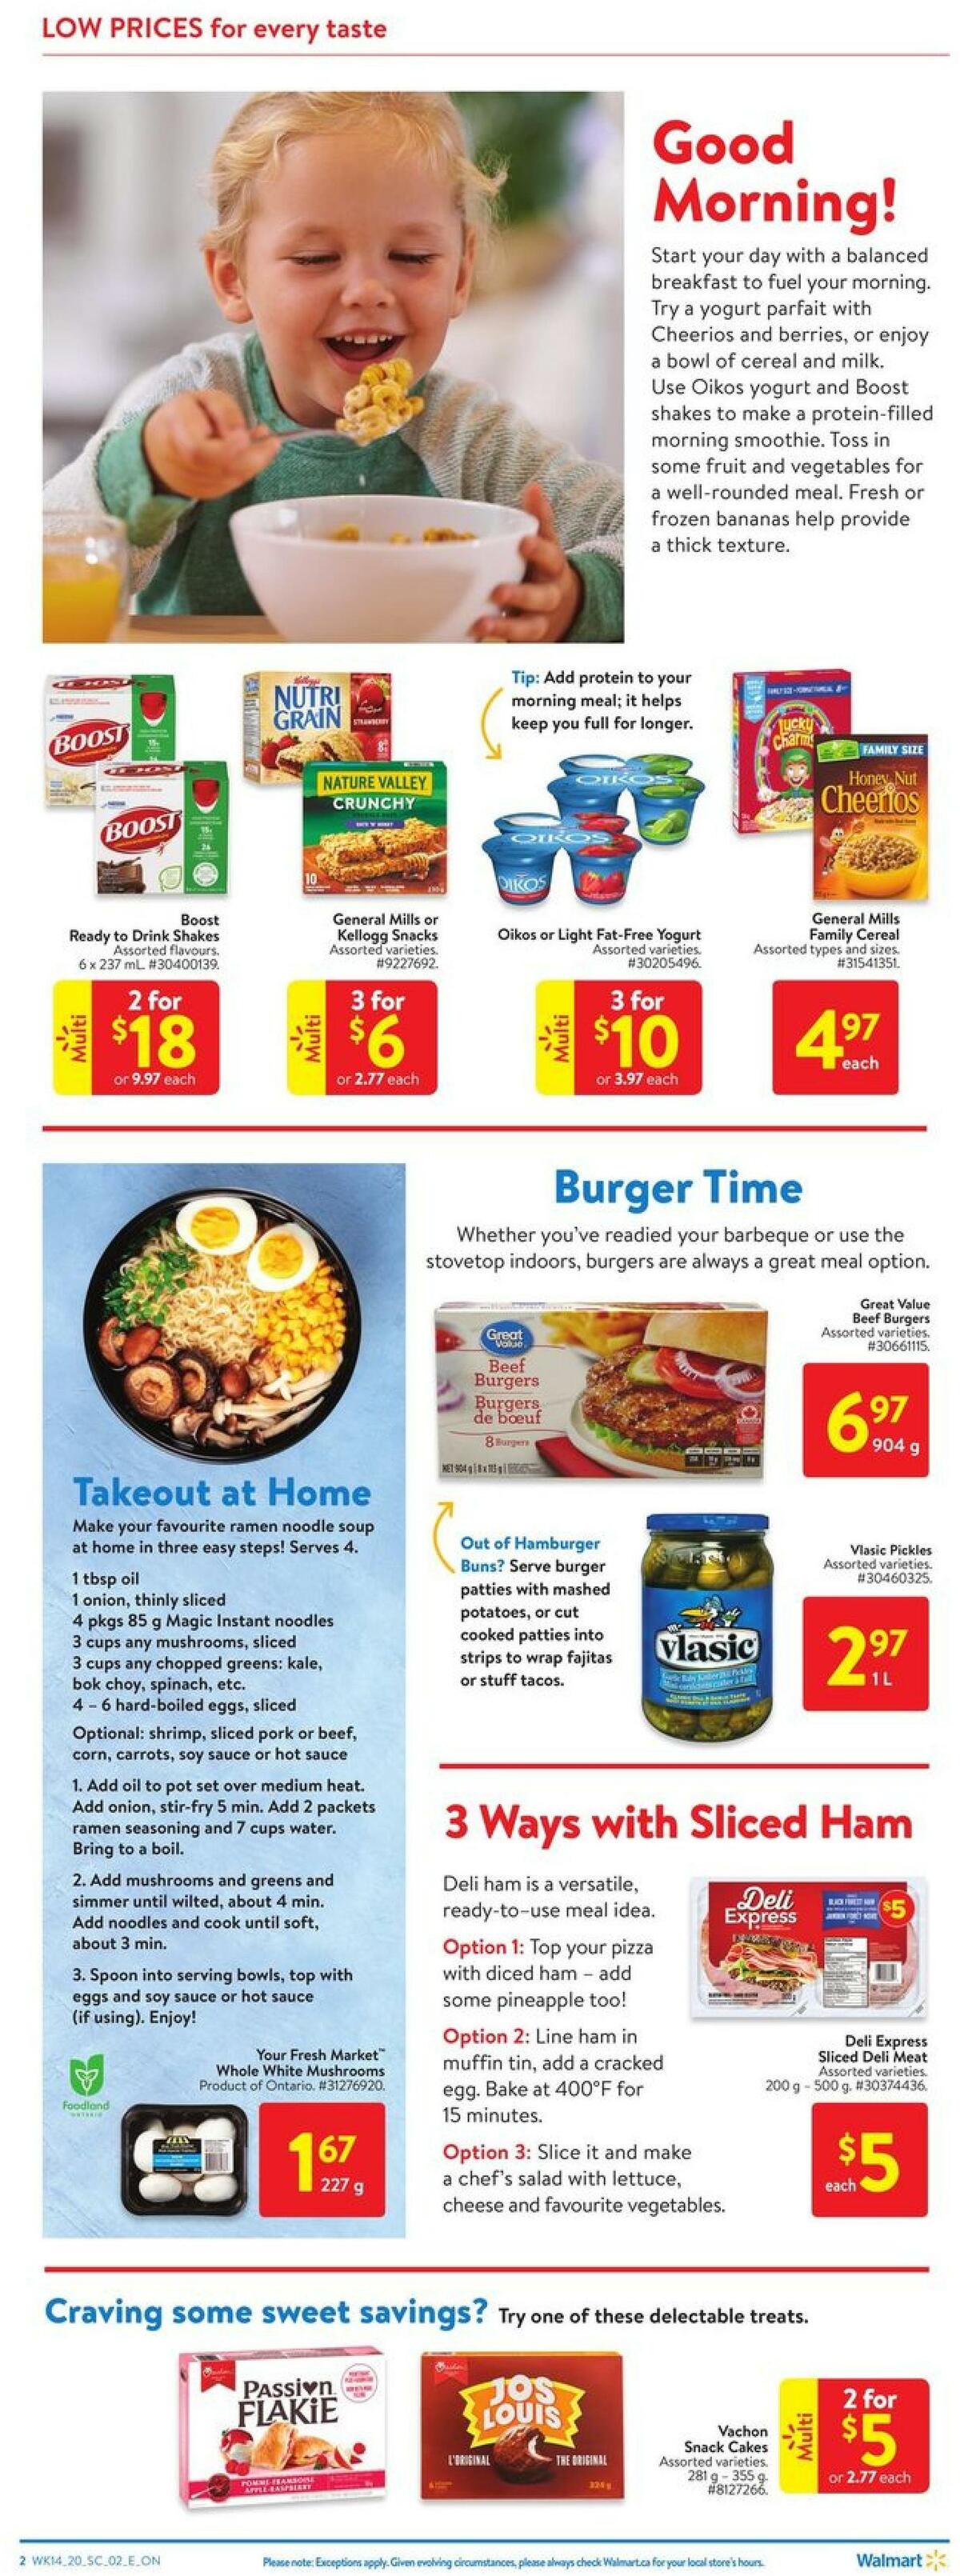 Walmart Flyer from April 30